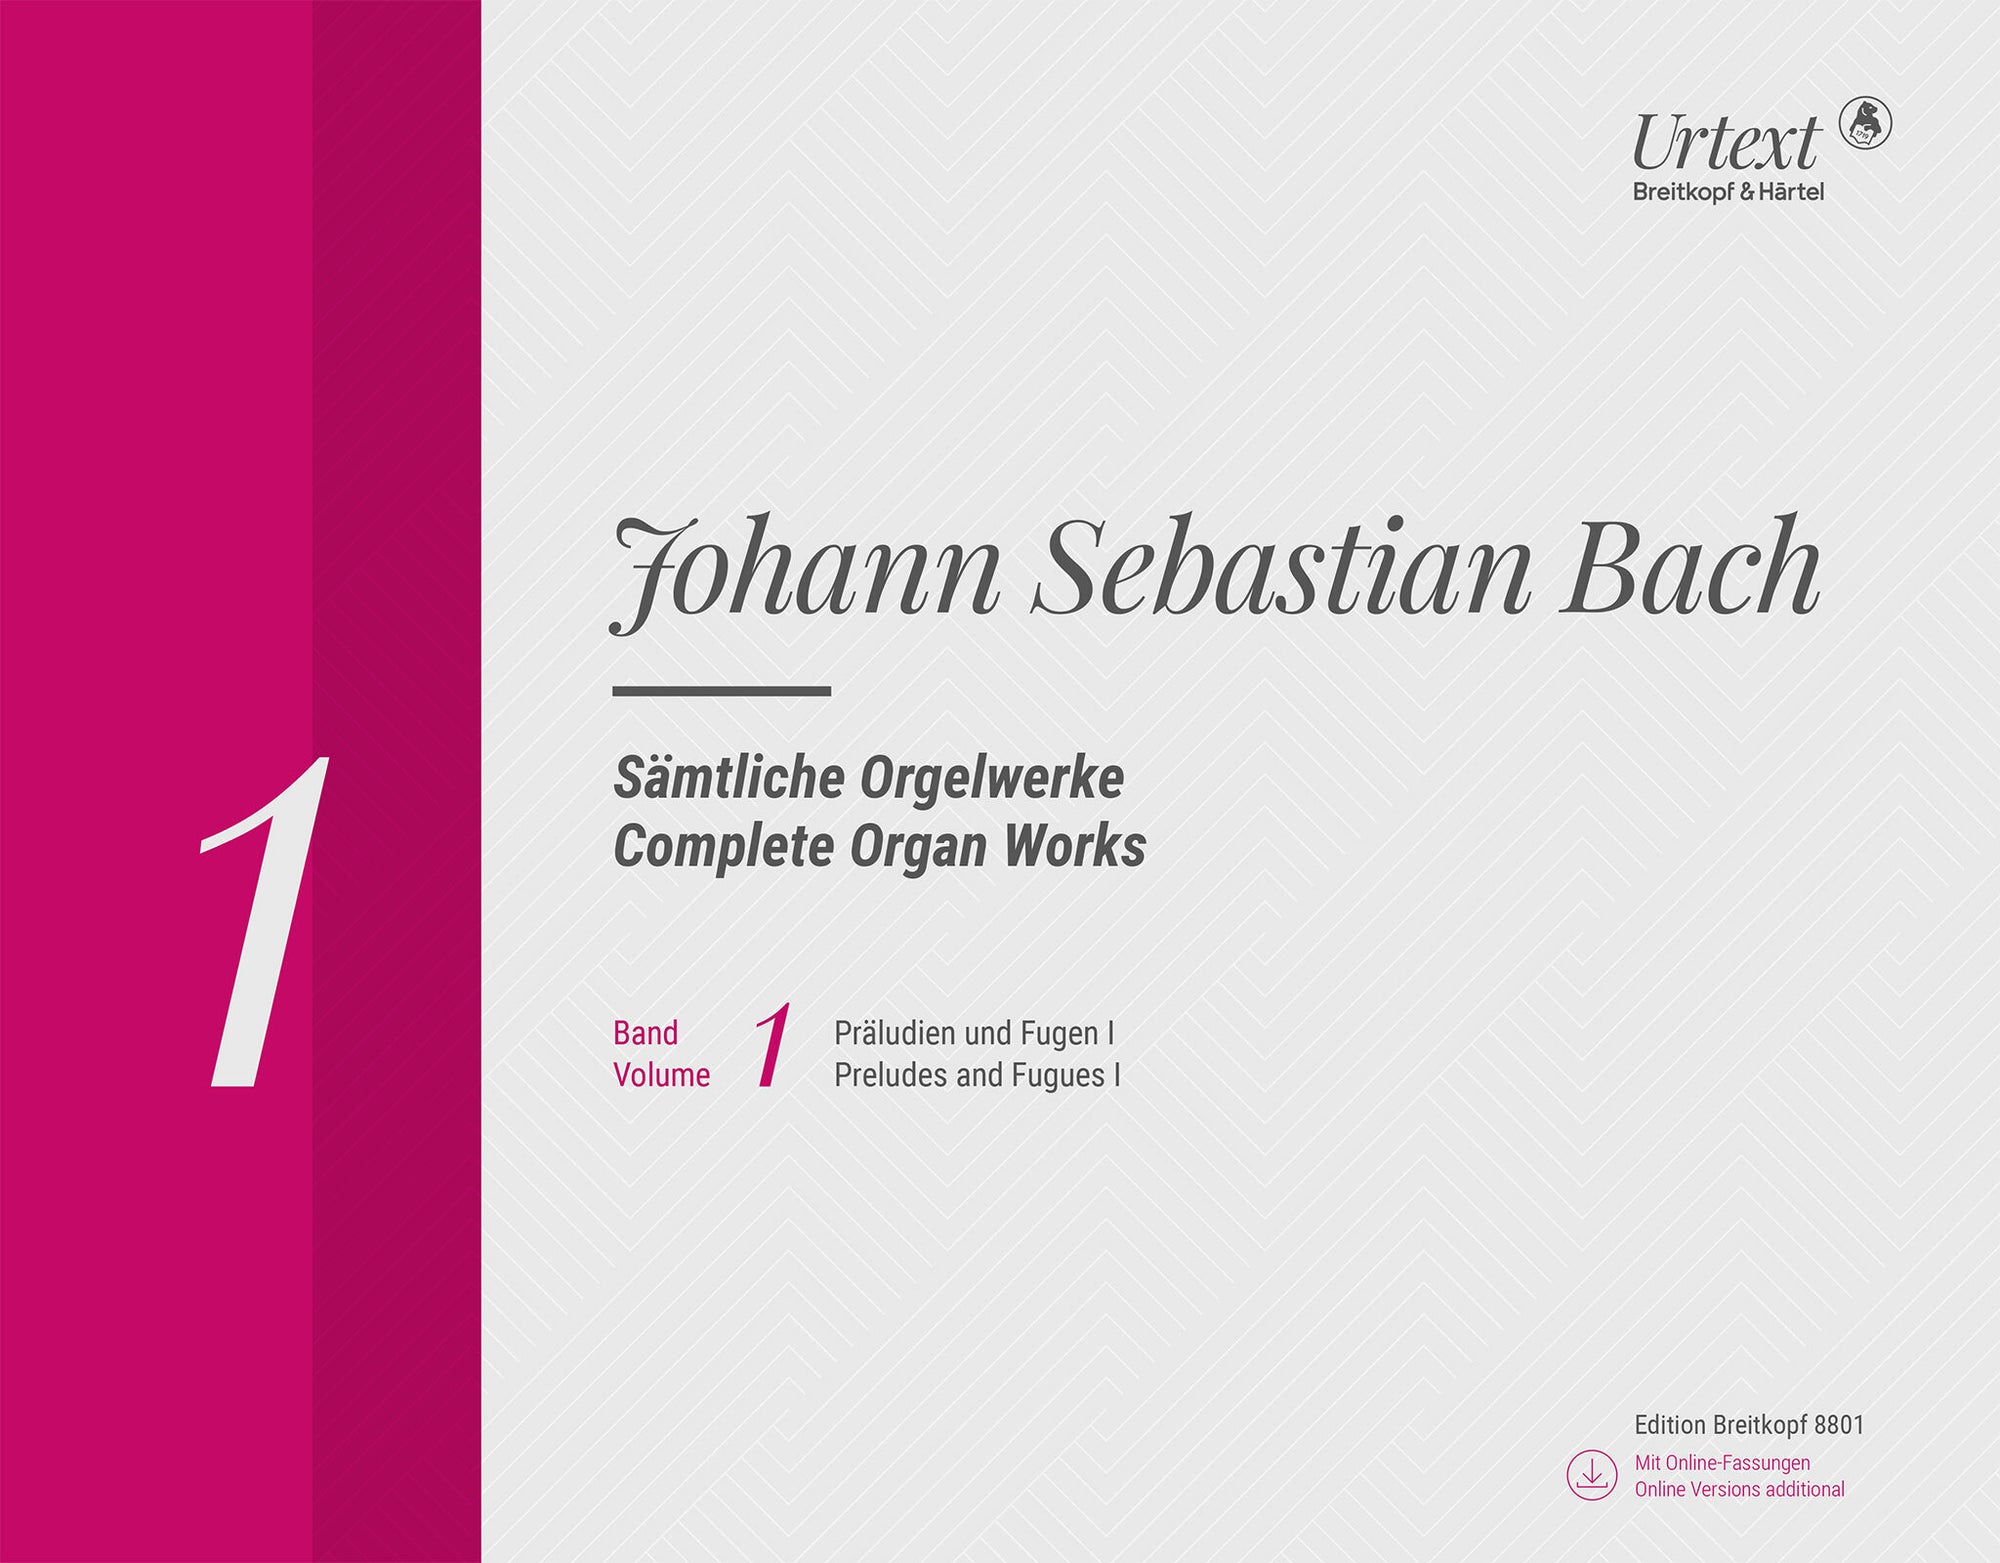 Bach: Complete Organ Works - Volume 1 (Preludes and Fugues - Part 1)